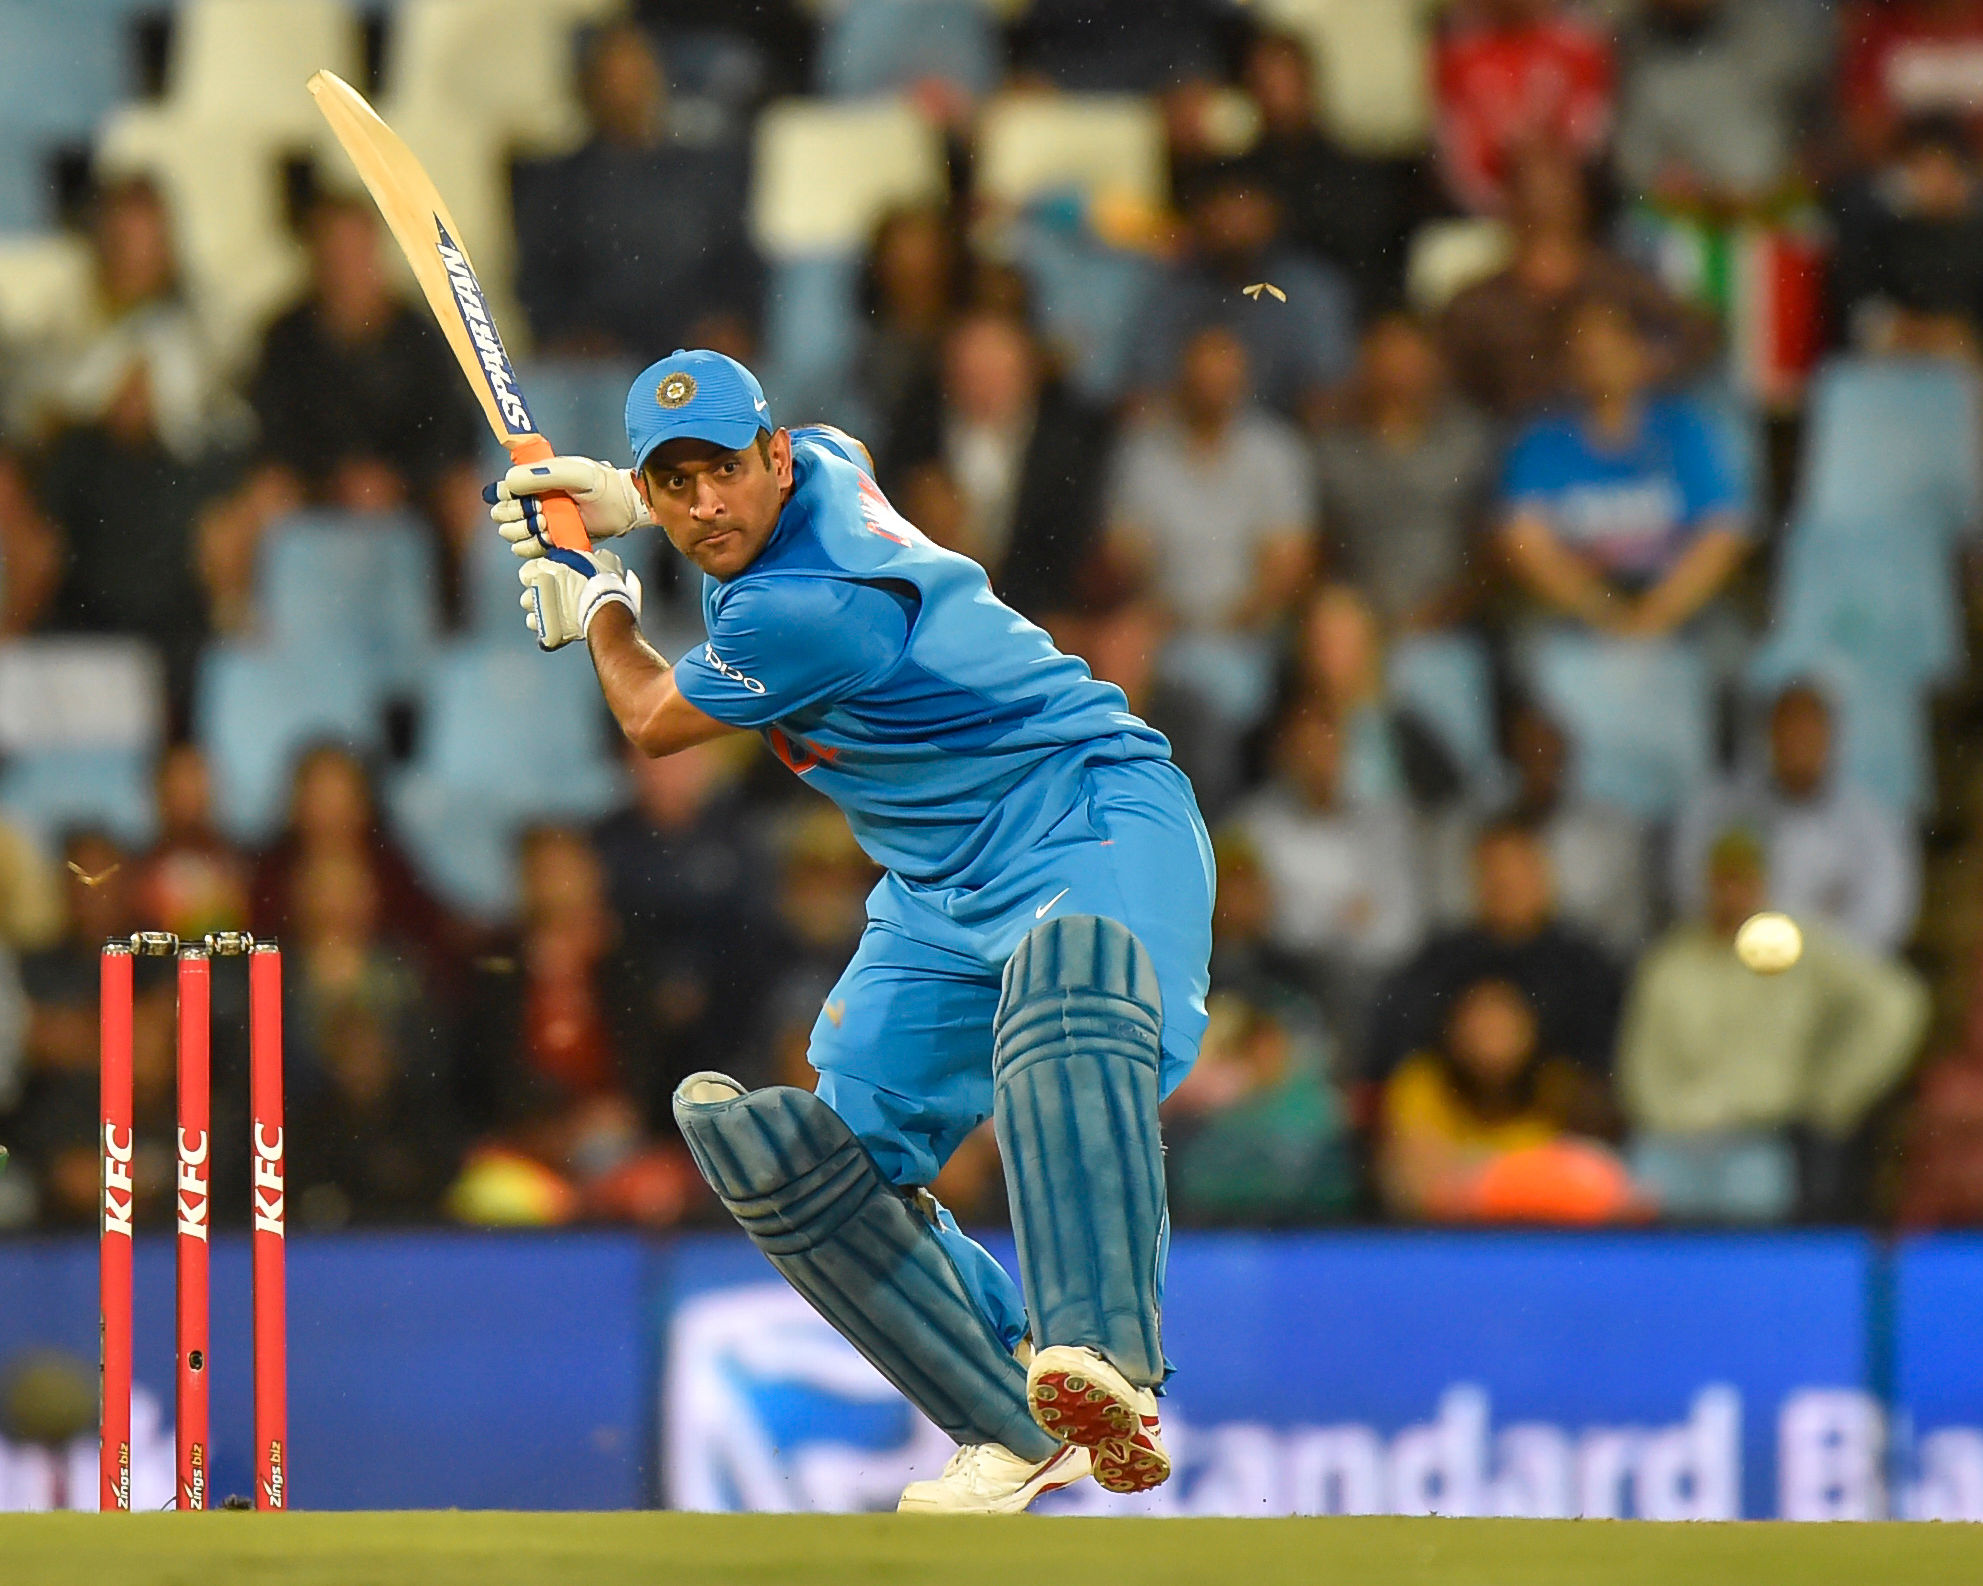 MS Dhoni’s birthday: 3 times ‘Captain Cool’ worked his magic on field